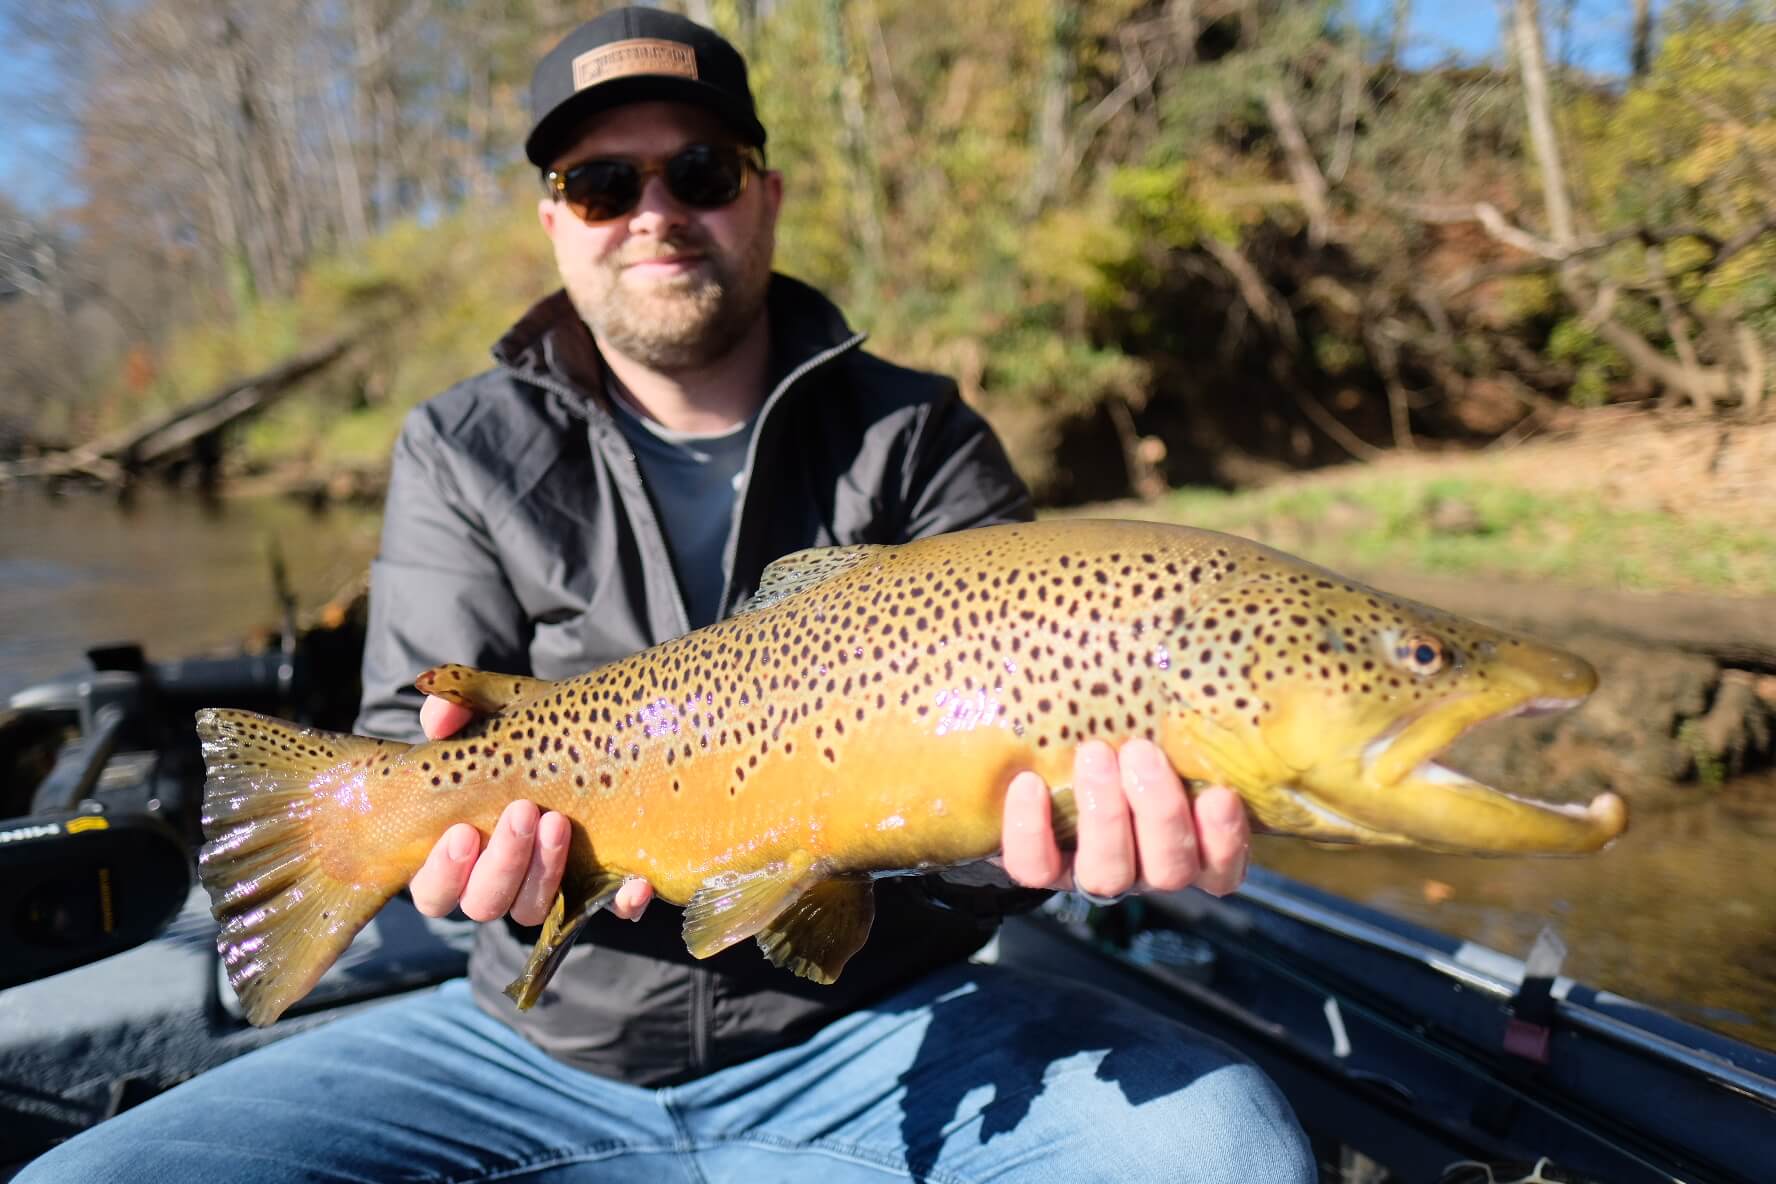 The Best White River Fishing Spots